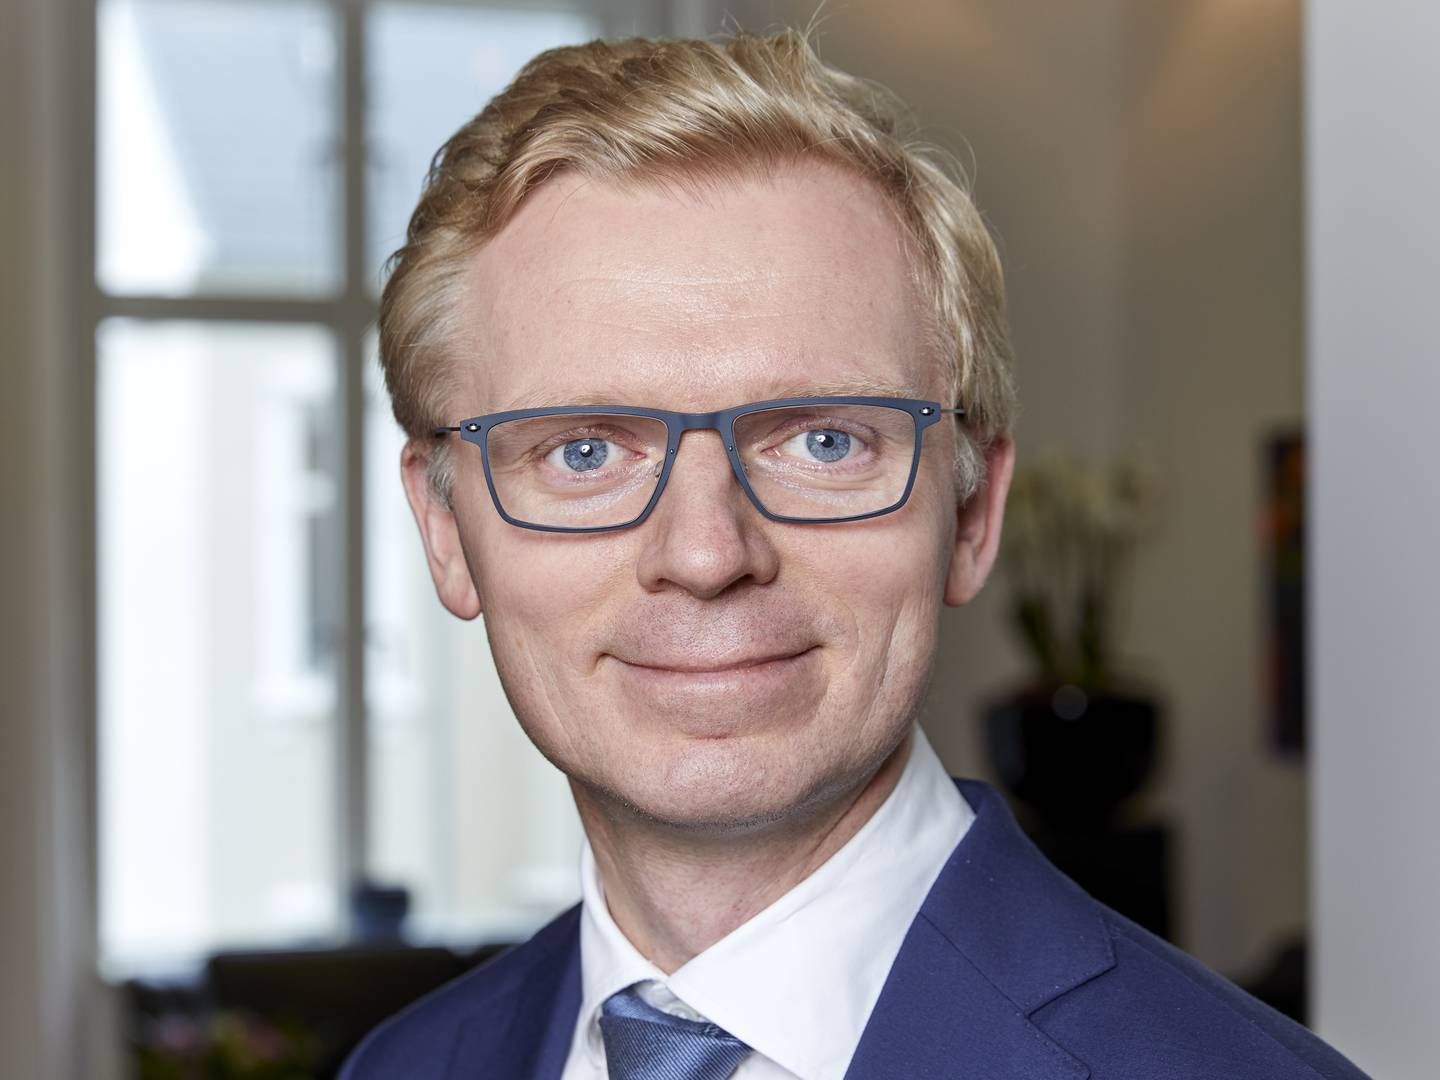 Søren Tang Kristensen began as head of real estate at Industriens Pension 2.5 year back after working at Velliv. | Photo: PR / Industriens Pension